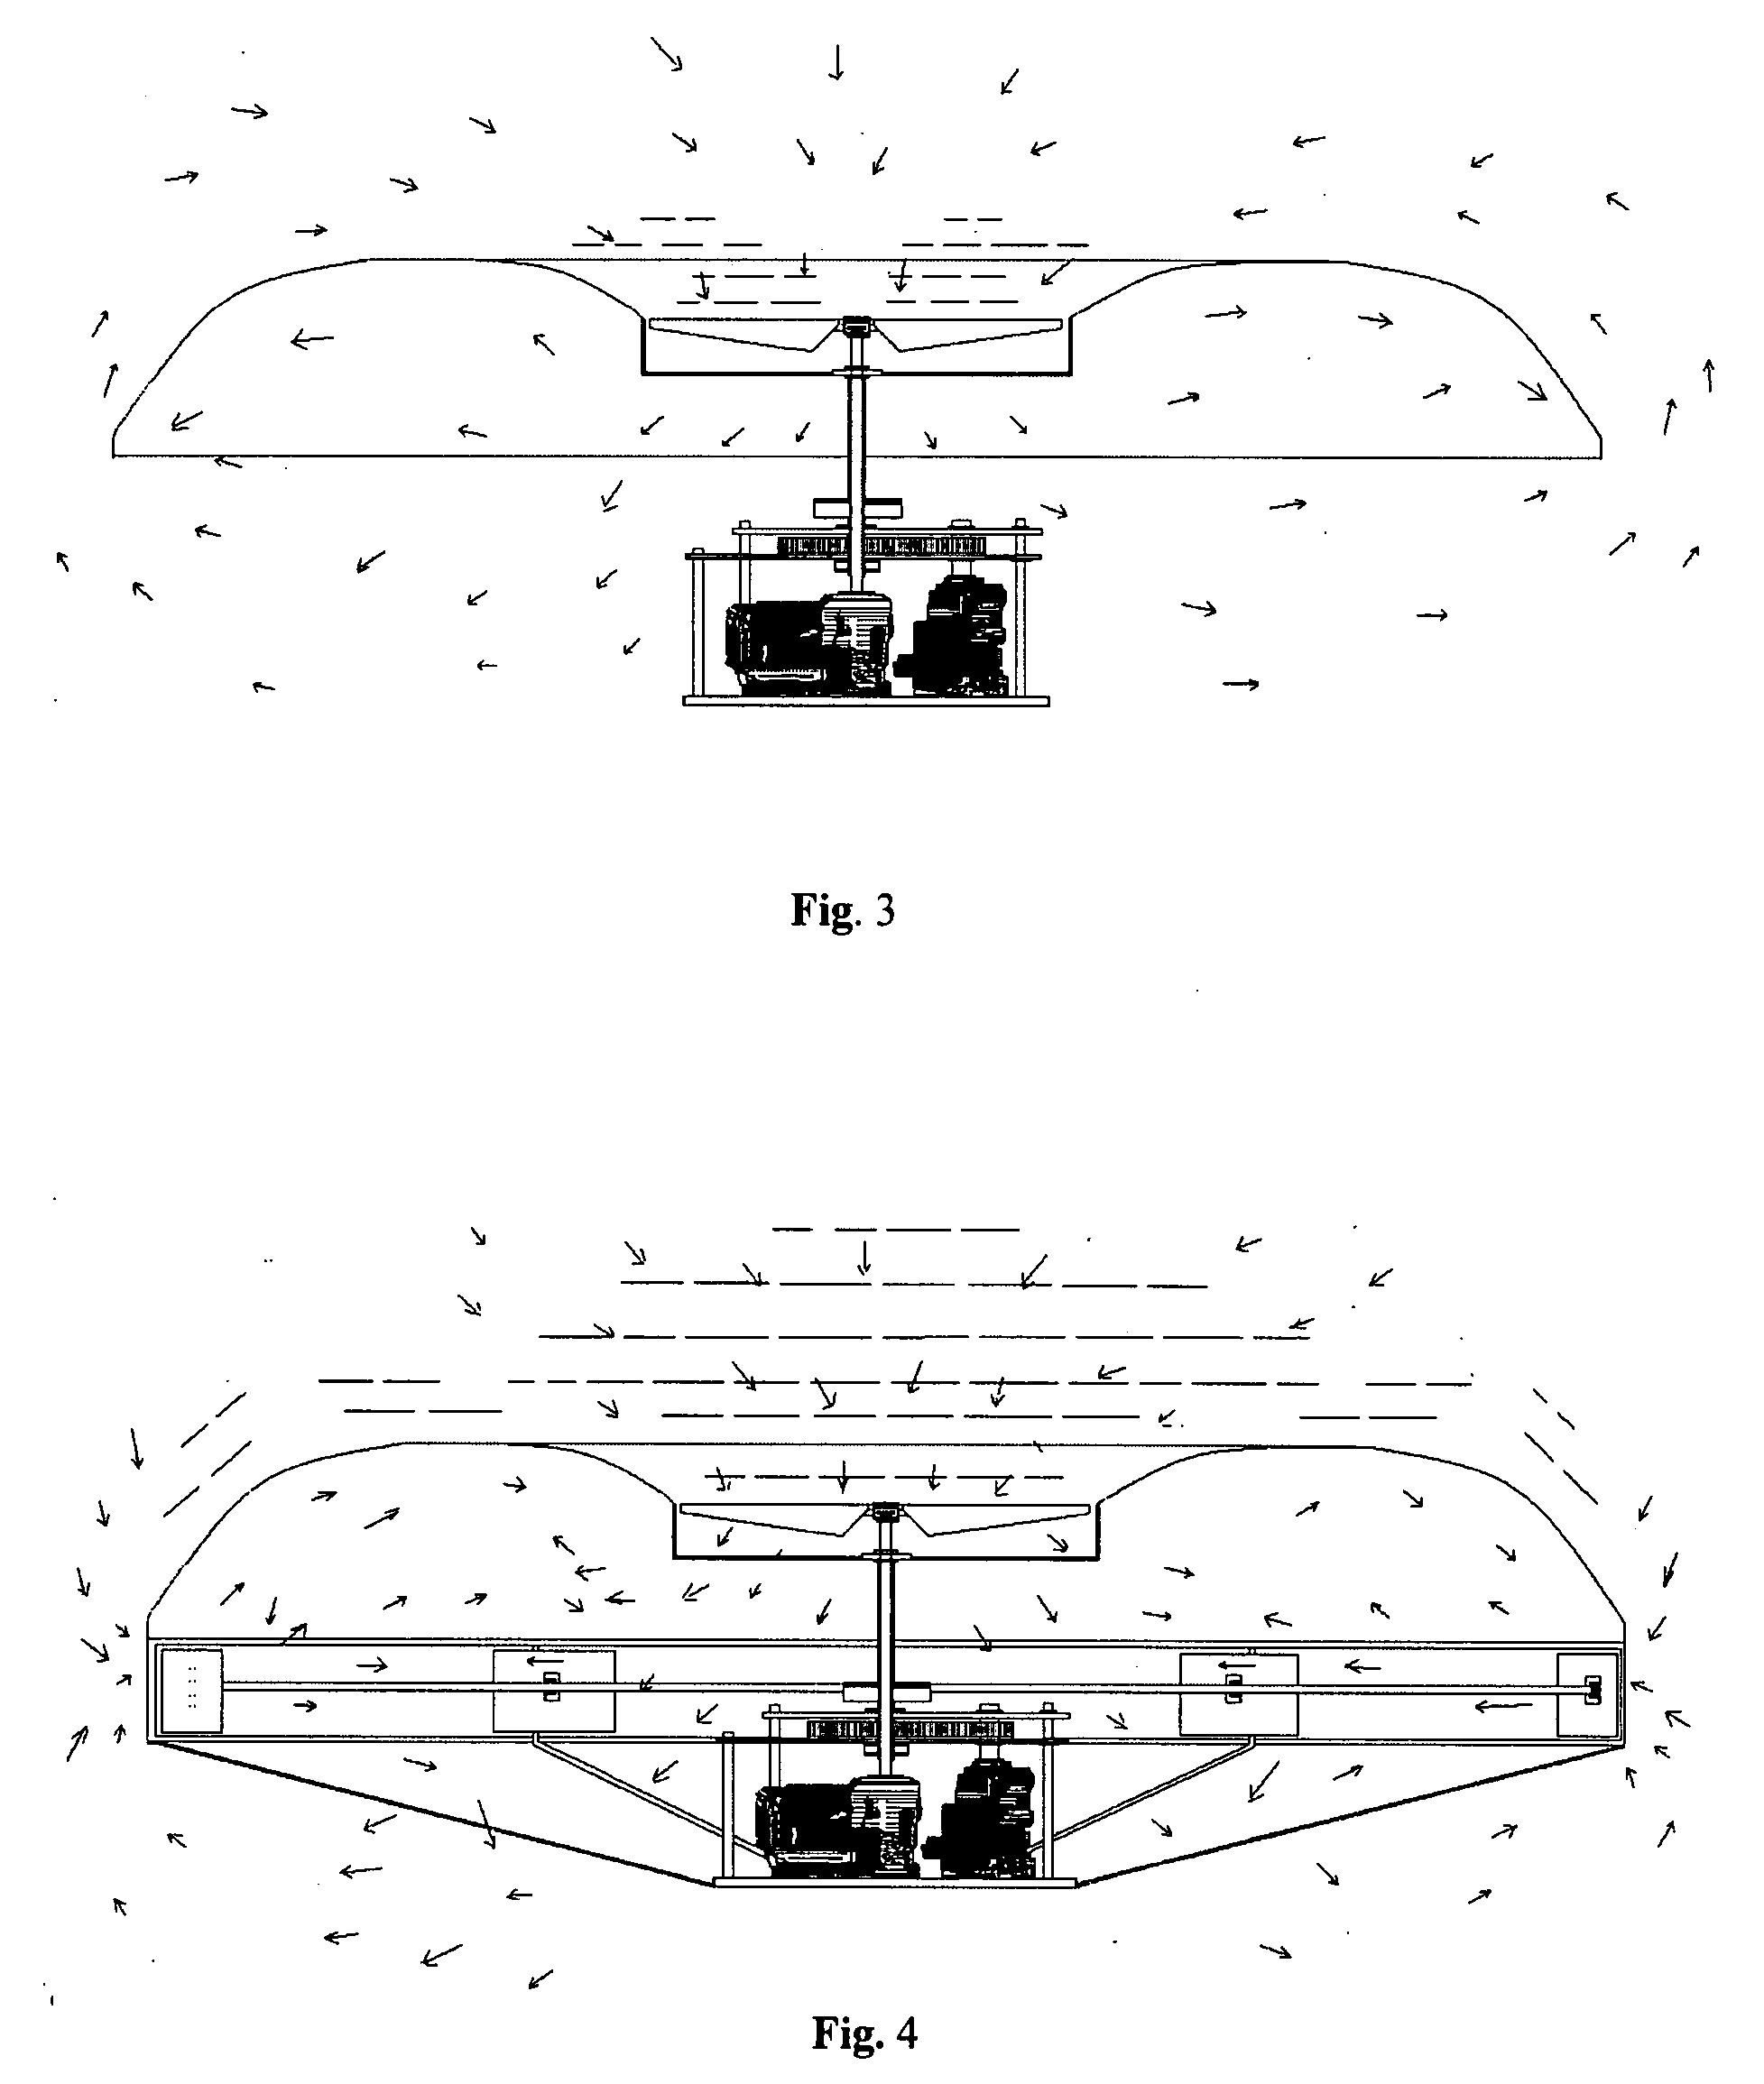 Aerial Lifting and Propulsion Device (ALPD)